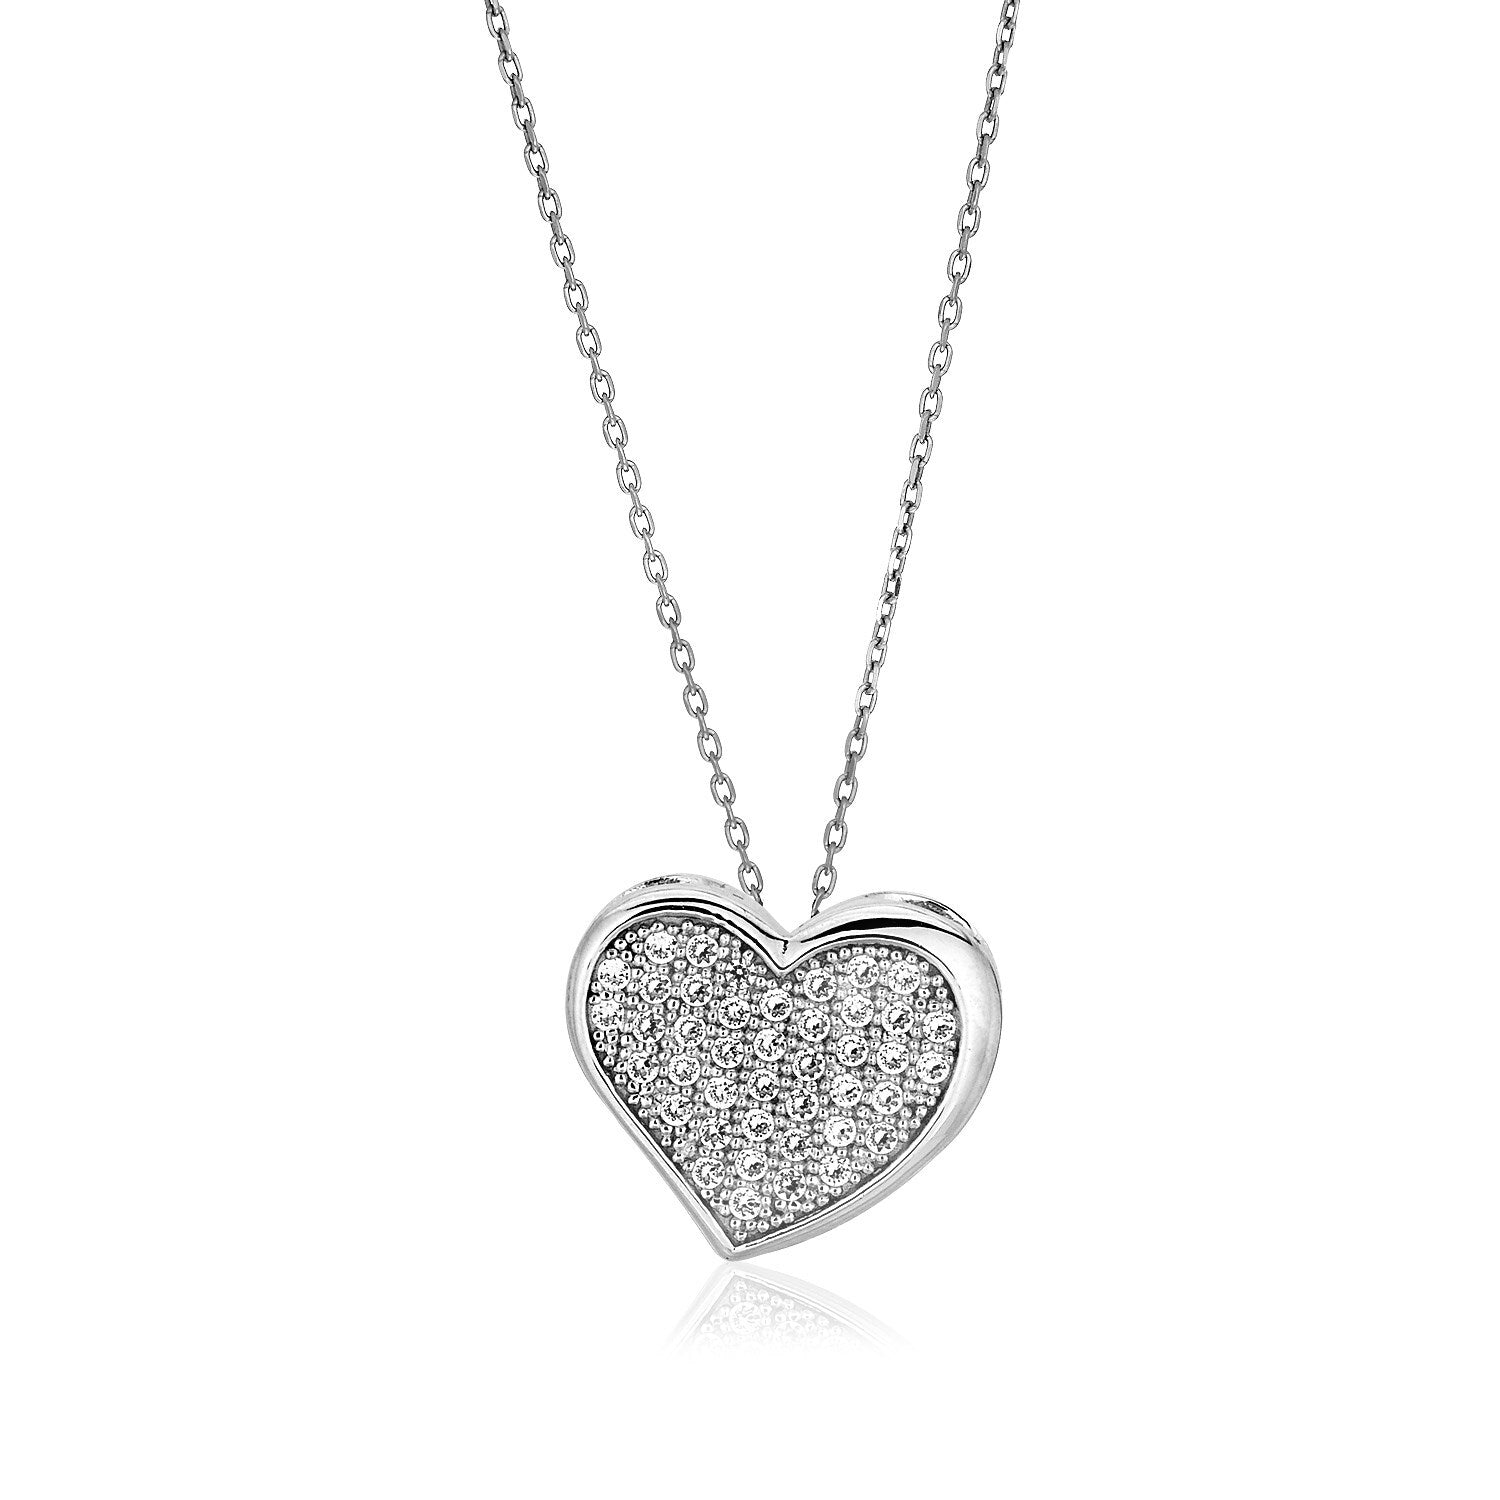 Size: 18'' - Sterling Silver Heart Necklace with Cubic Zirconias